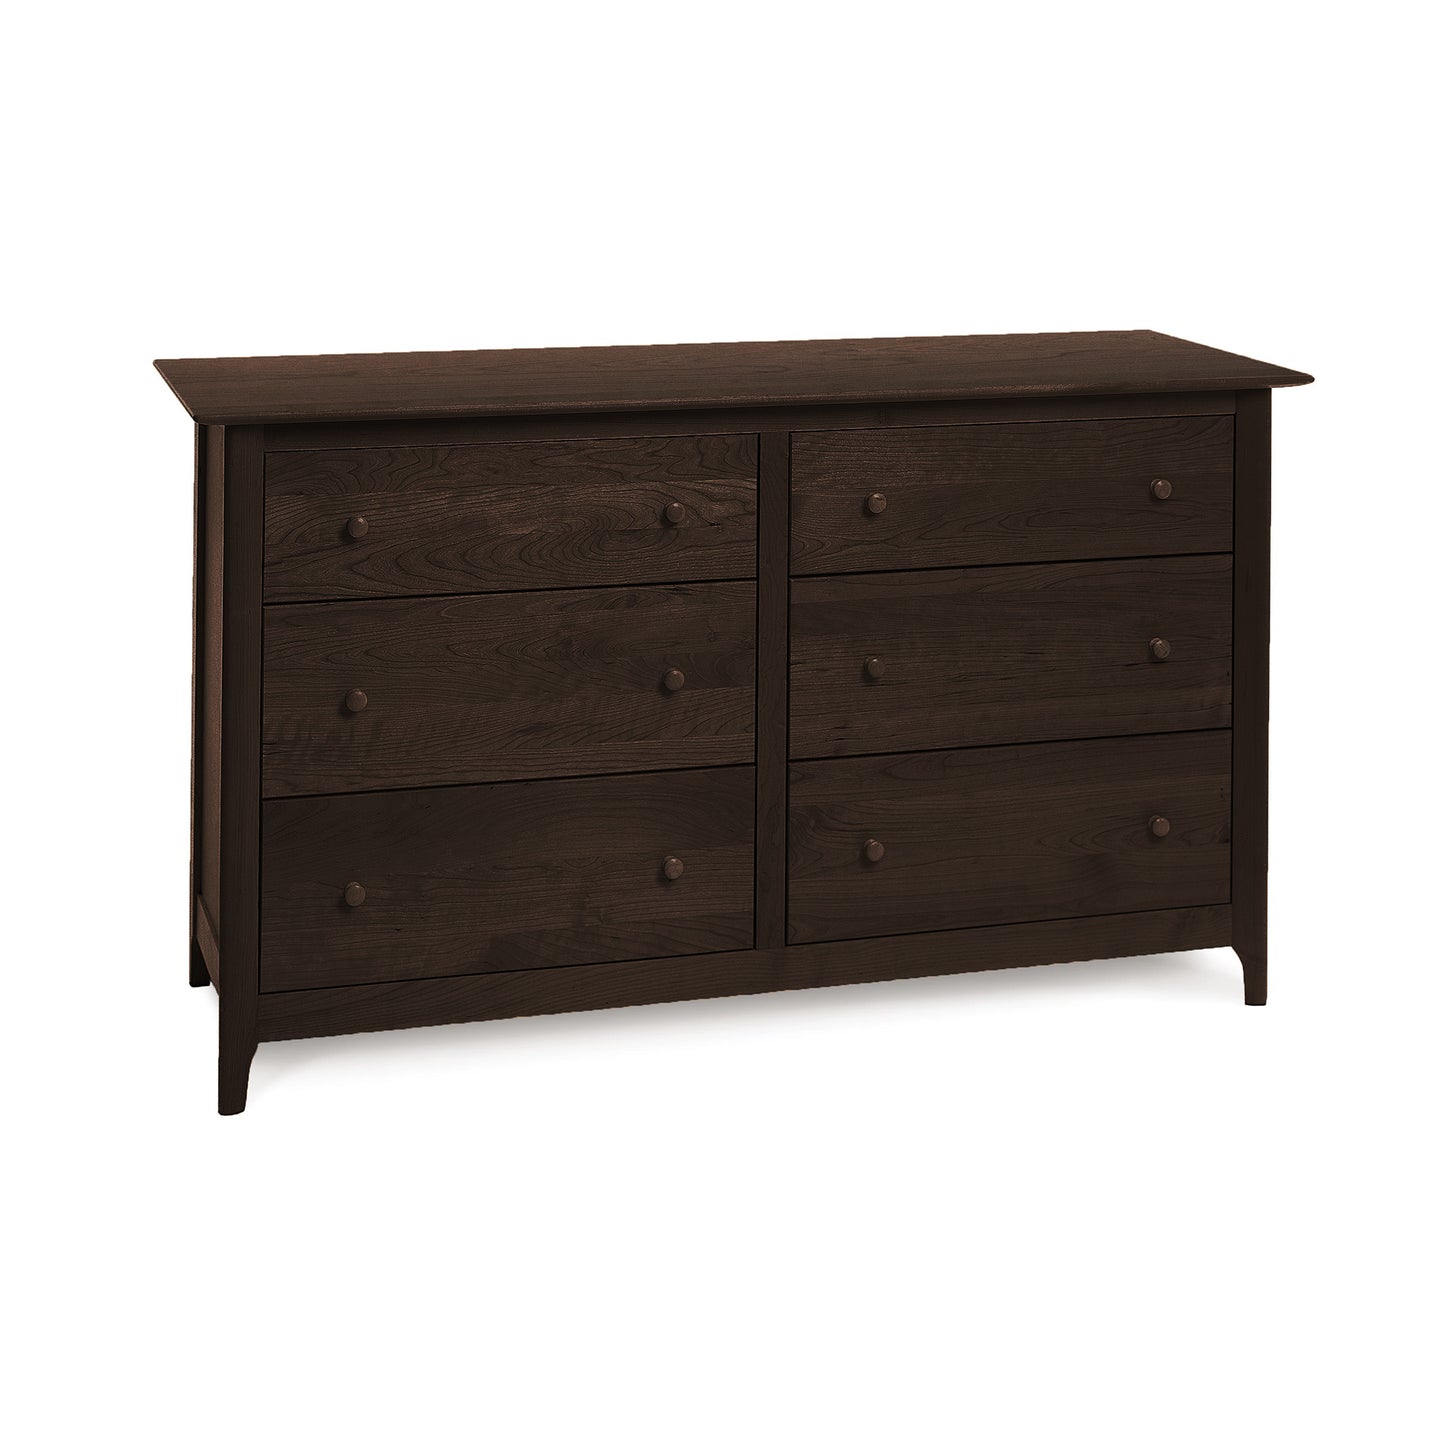 A Sarah 6-Drawer Dresser by Copeland Furniture with a dark finish isolated on a white background.